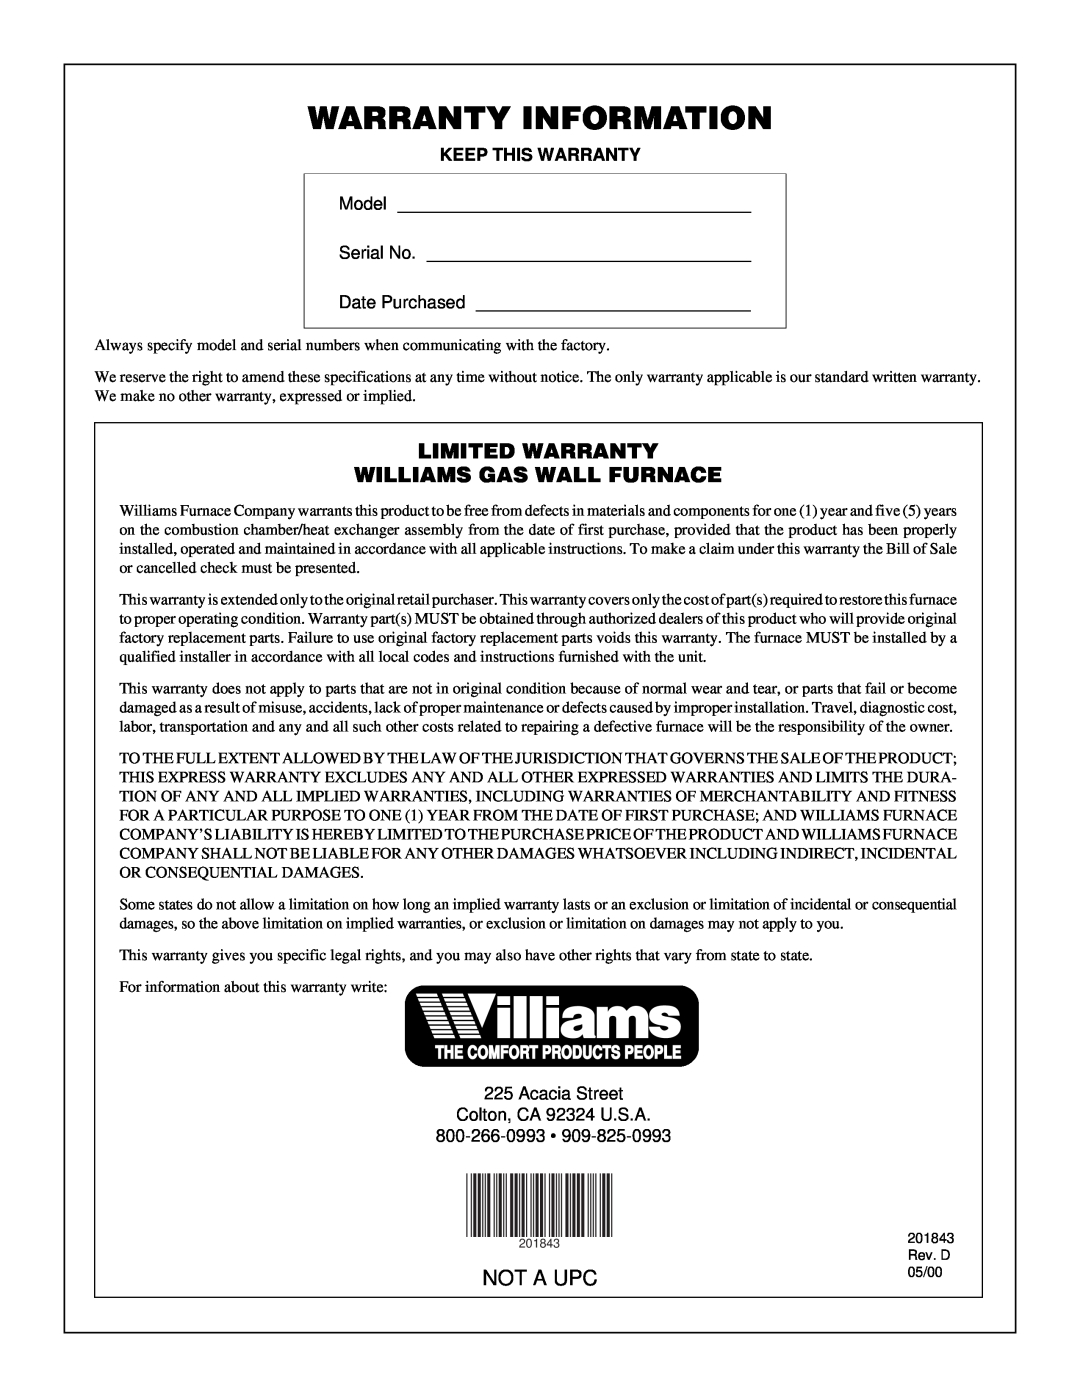 Williams 2503531 Warranty Information, Limited Warranty Williams Gas Wall Furnace, Not A Upc, The Comfort Products People 